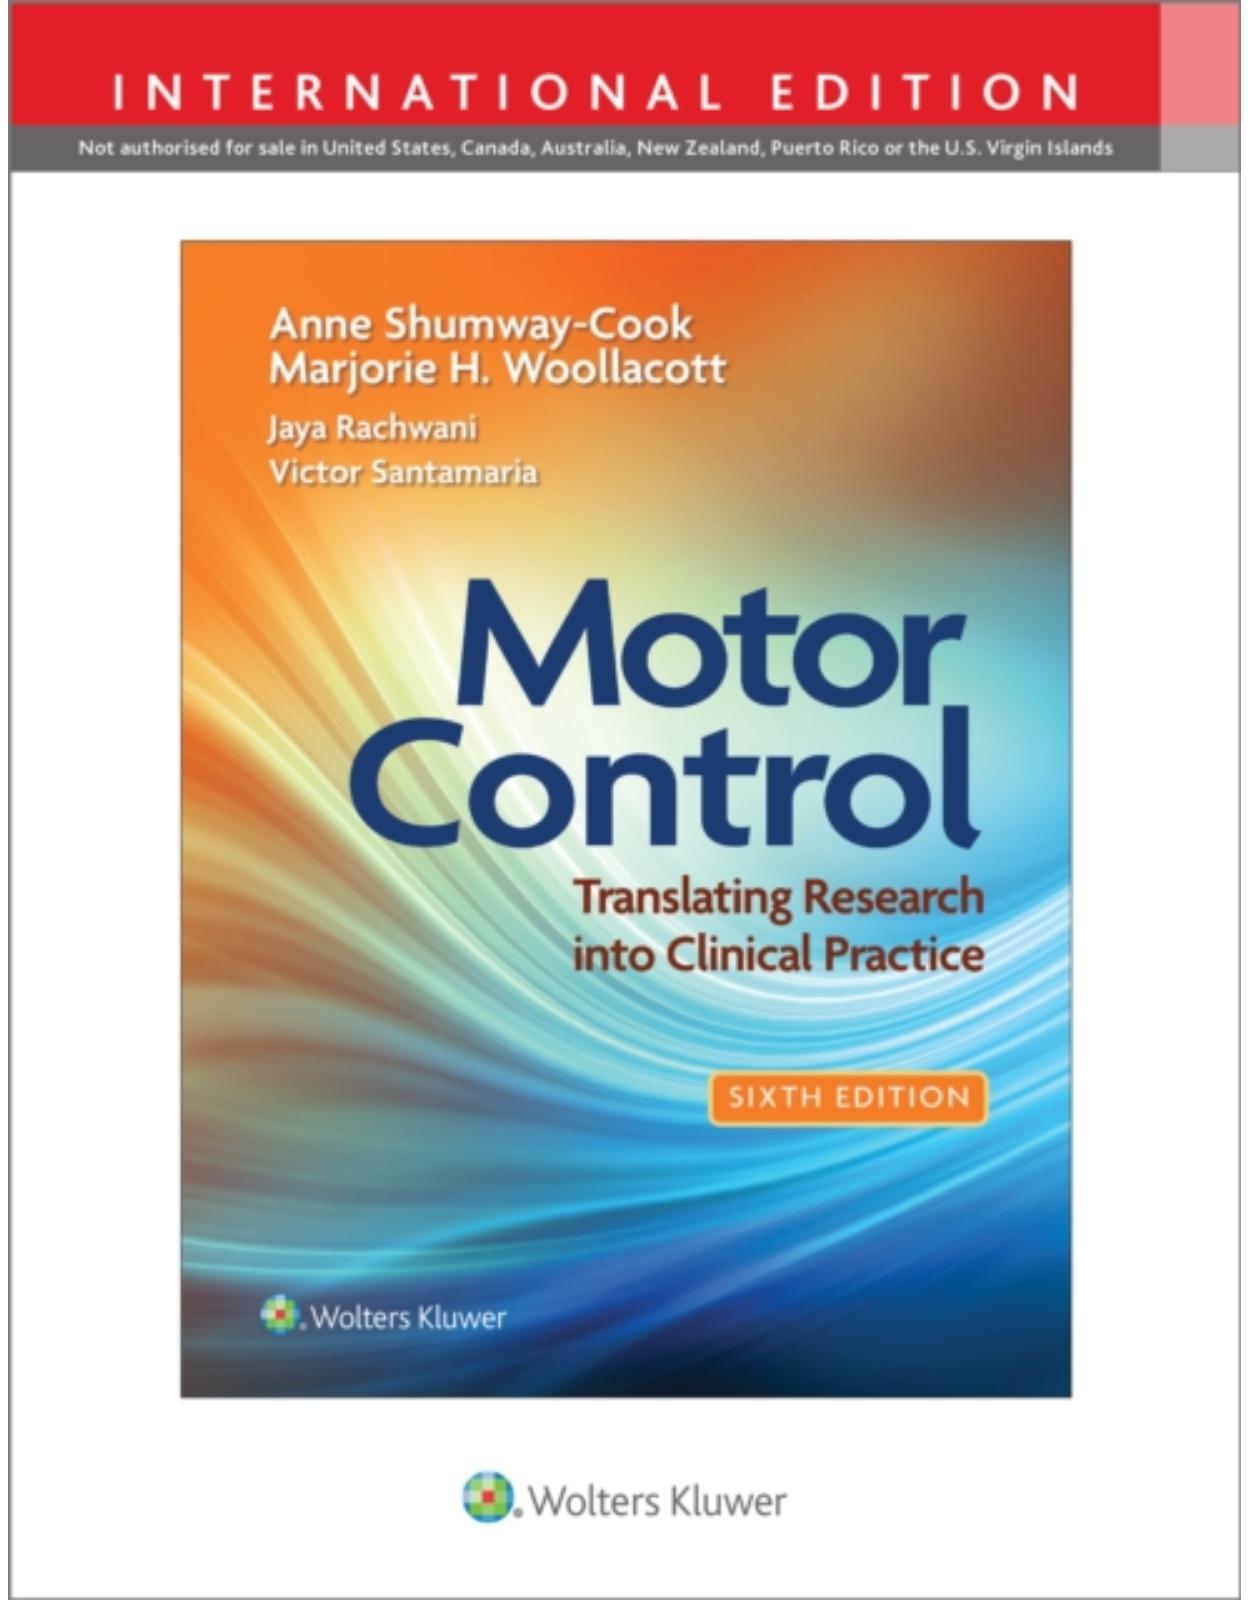 Motor Control: Translating Research into Clinical Practice